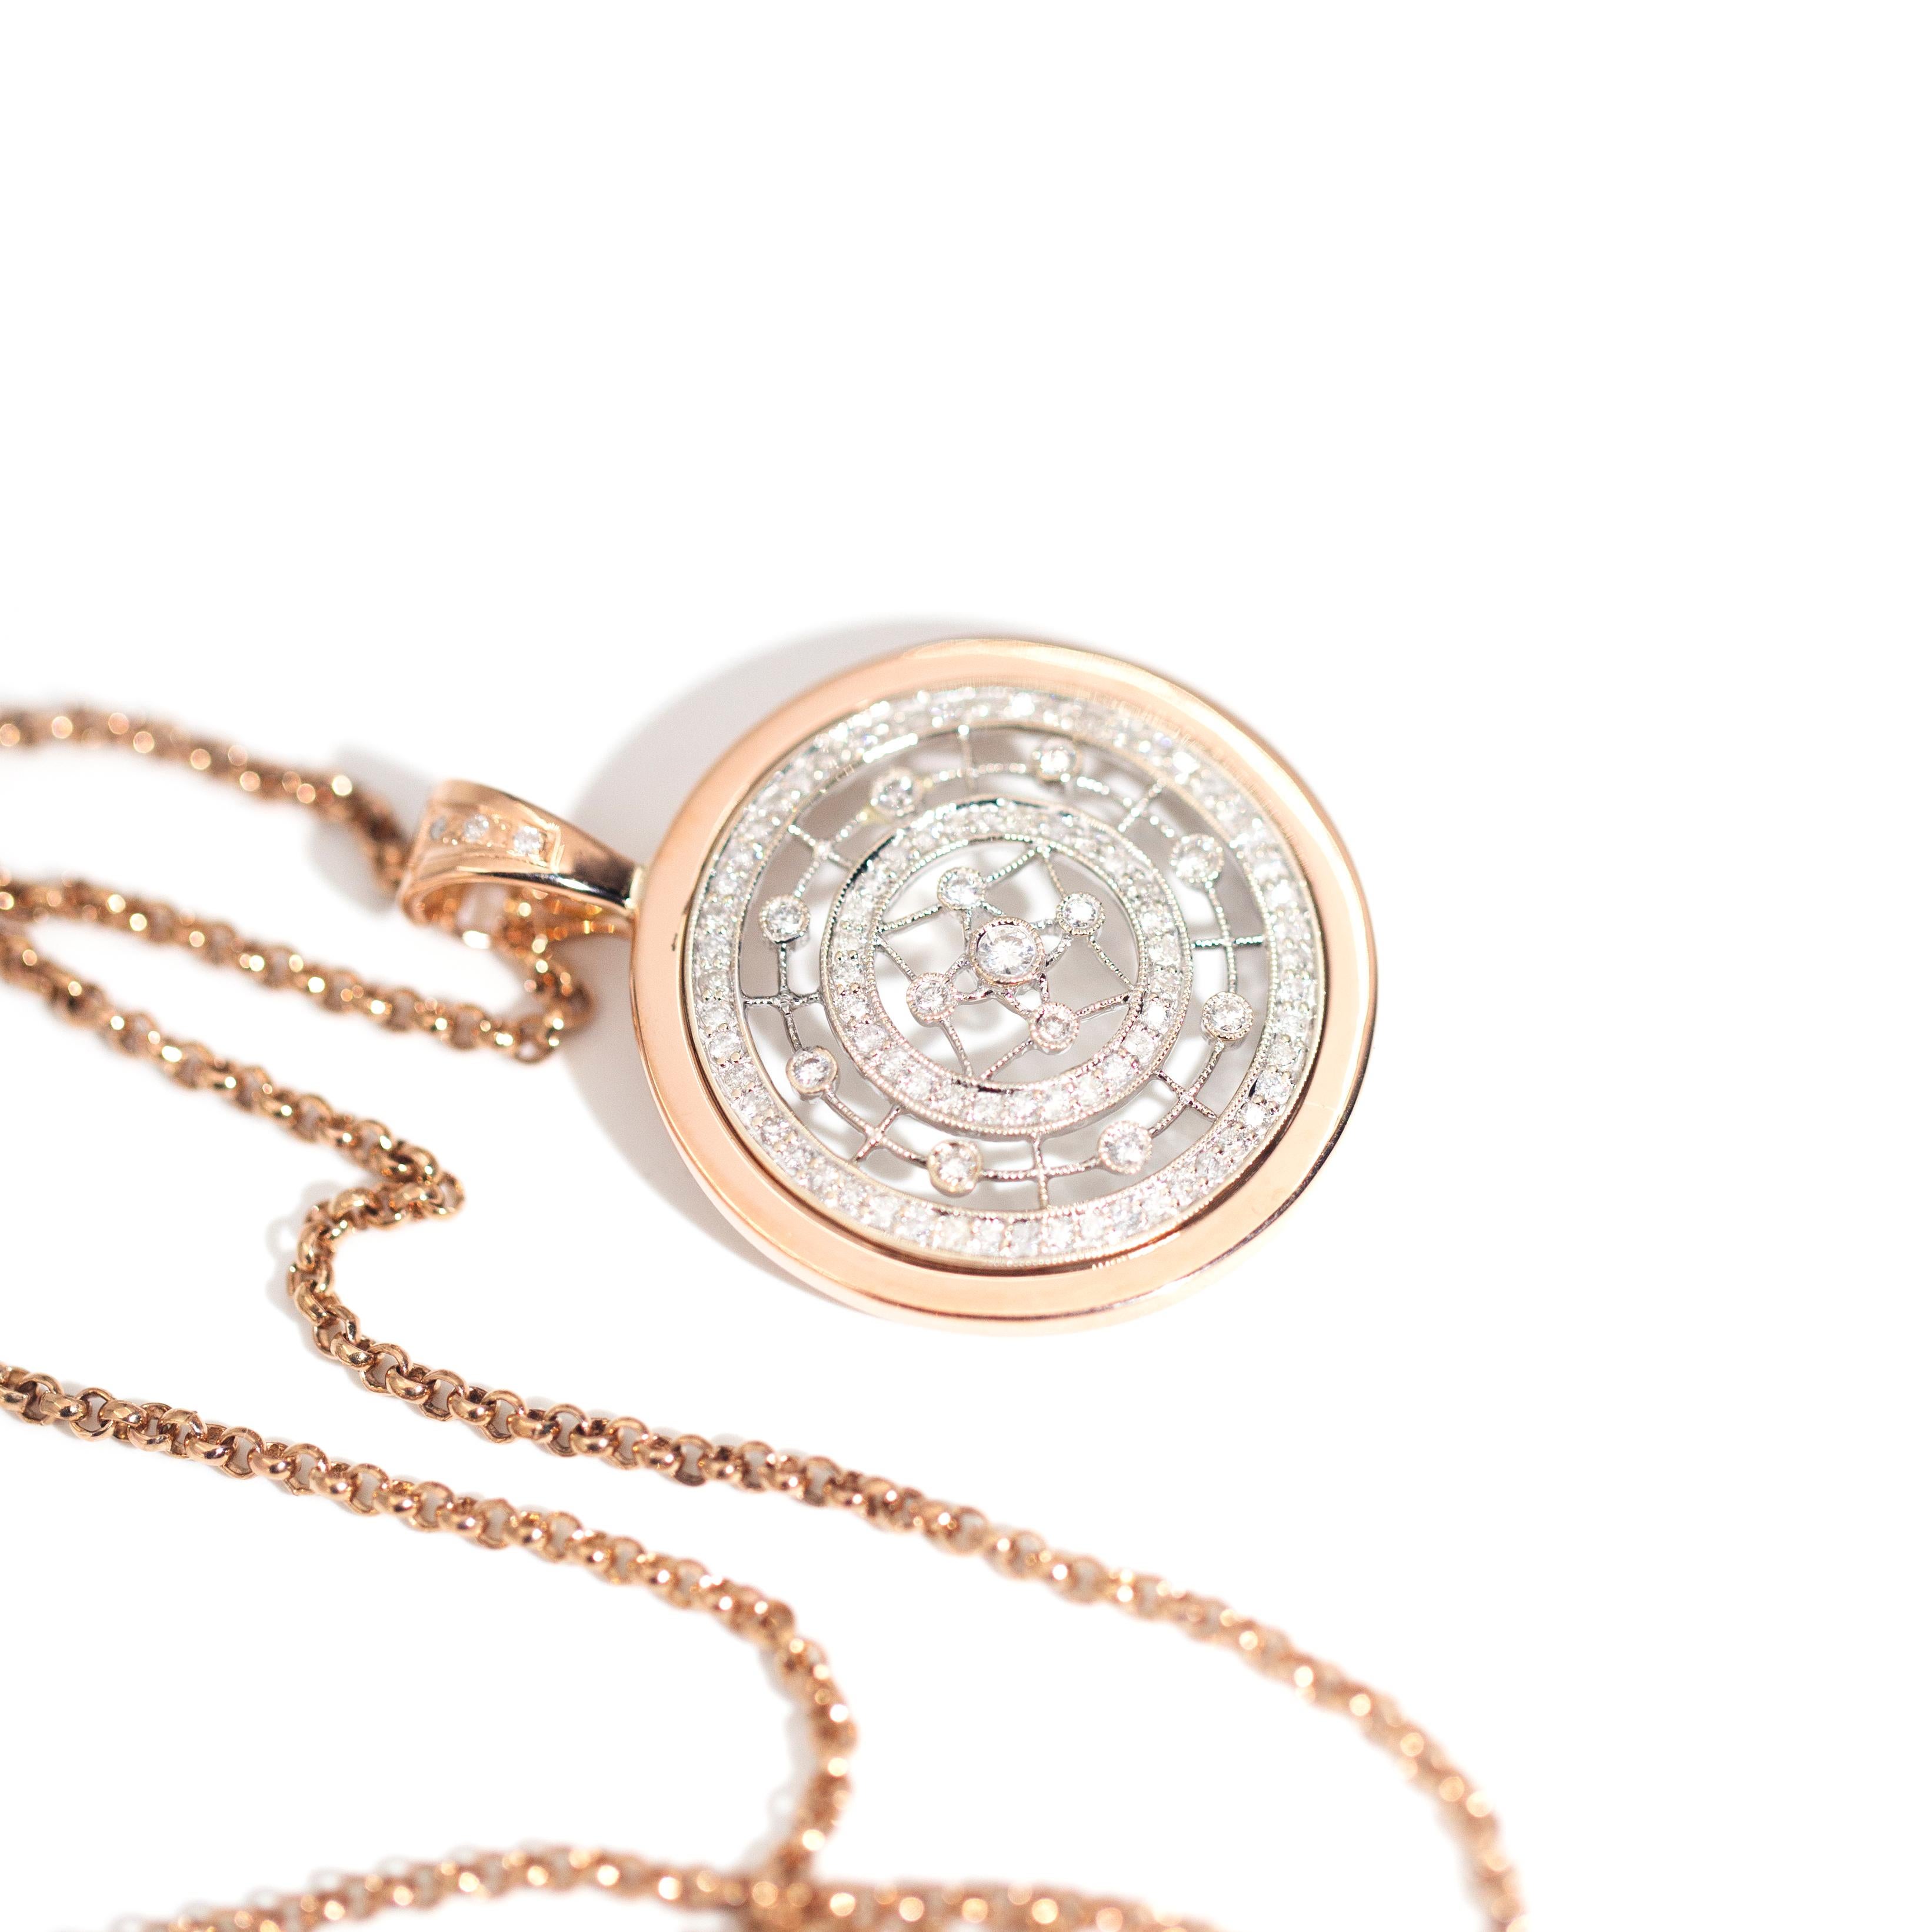 Circa 1980s 9 Carat Rose and White Gold Diamond Disc Enhancer Pendant and Chain 5